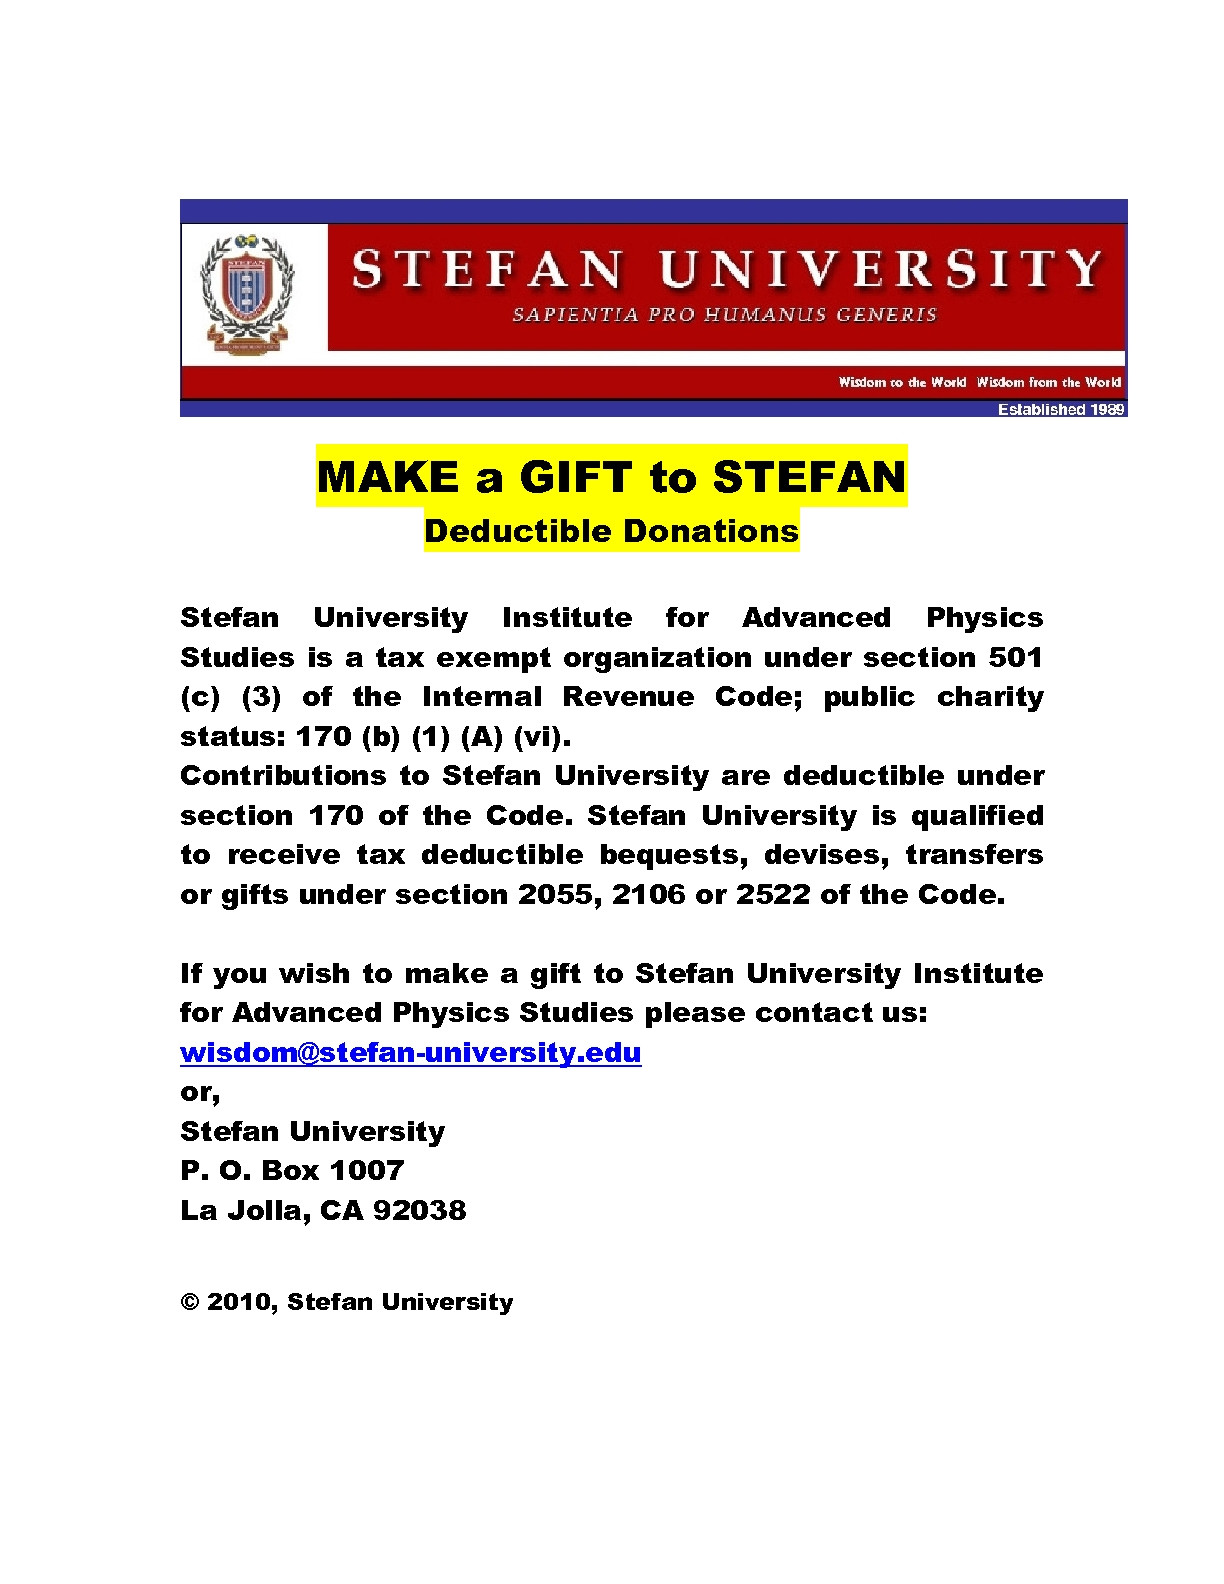 Tax Deductible Gifts To Child
 The STEFAN UNIVERSITY